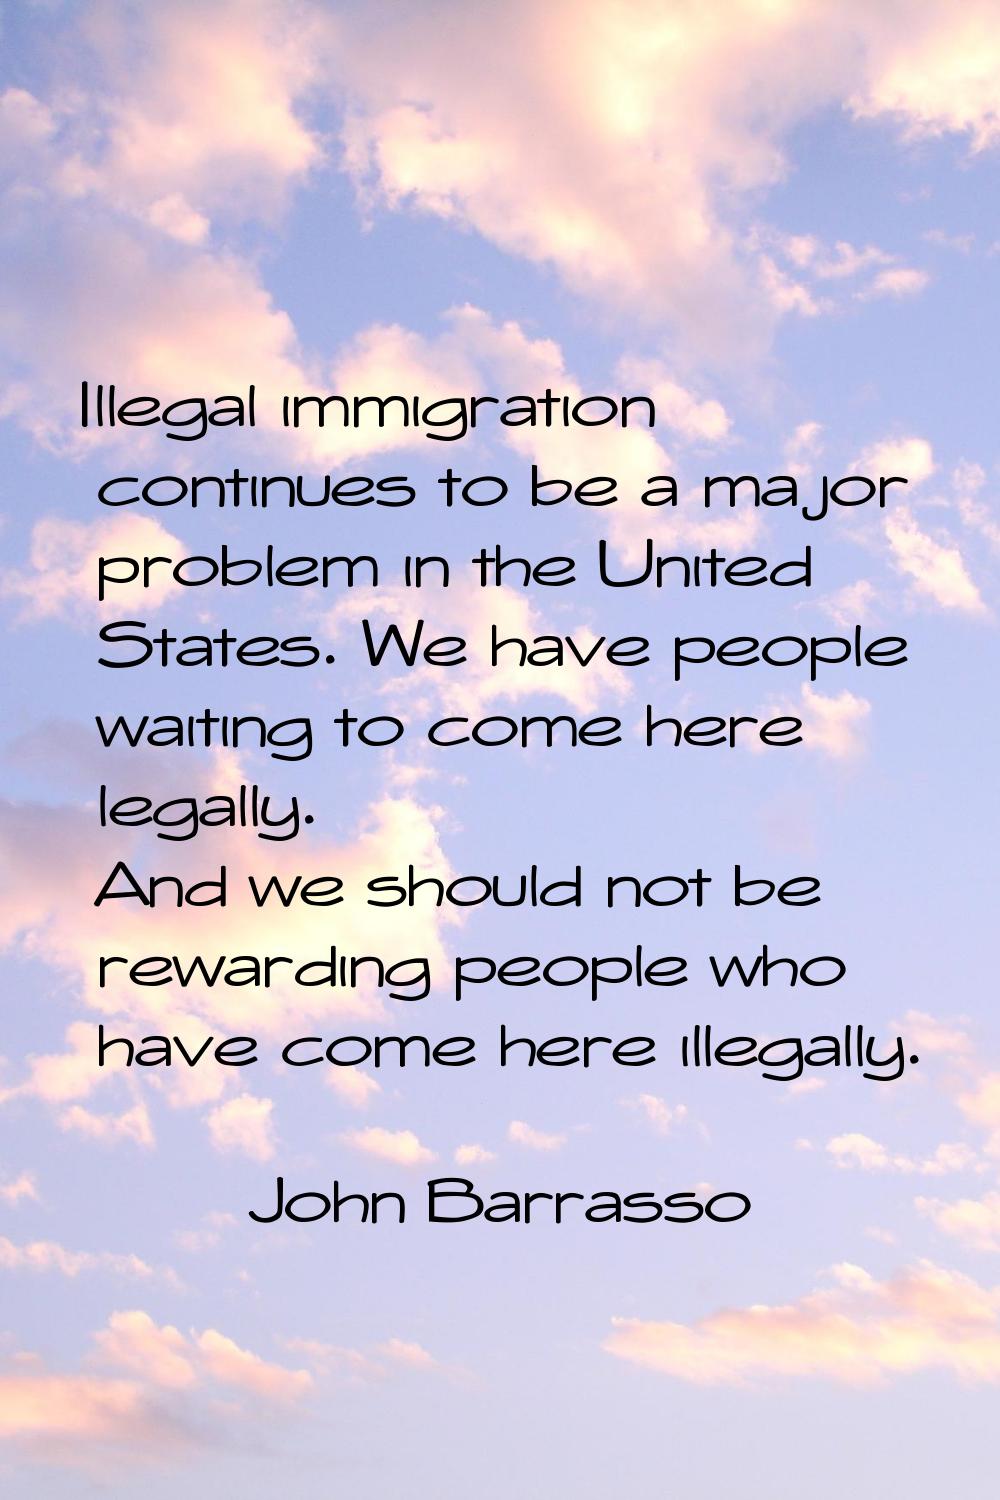 Illegal immigration continues to be a major problem in the United States. We have people waiting to